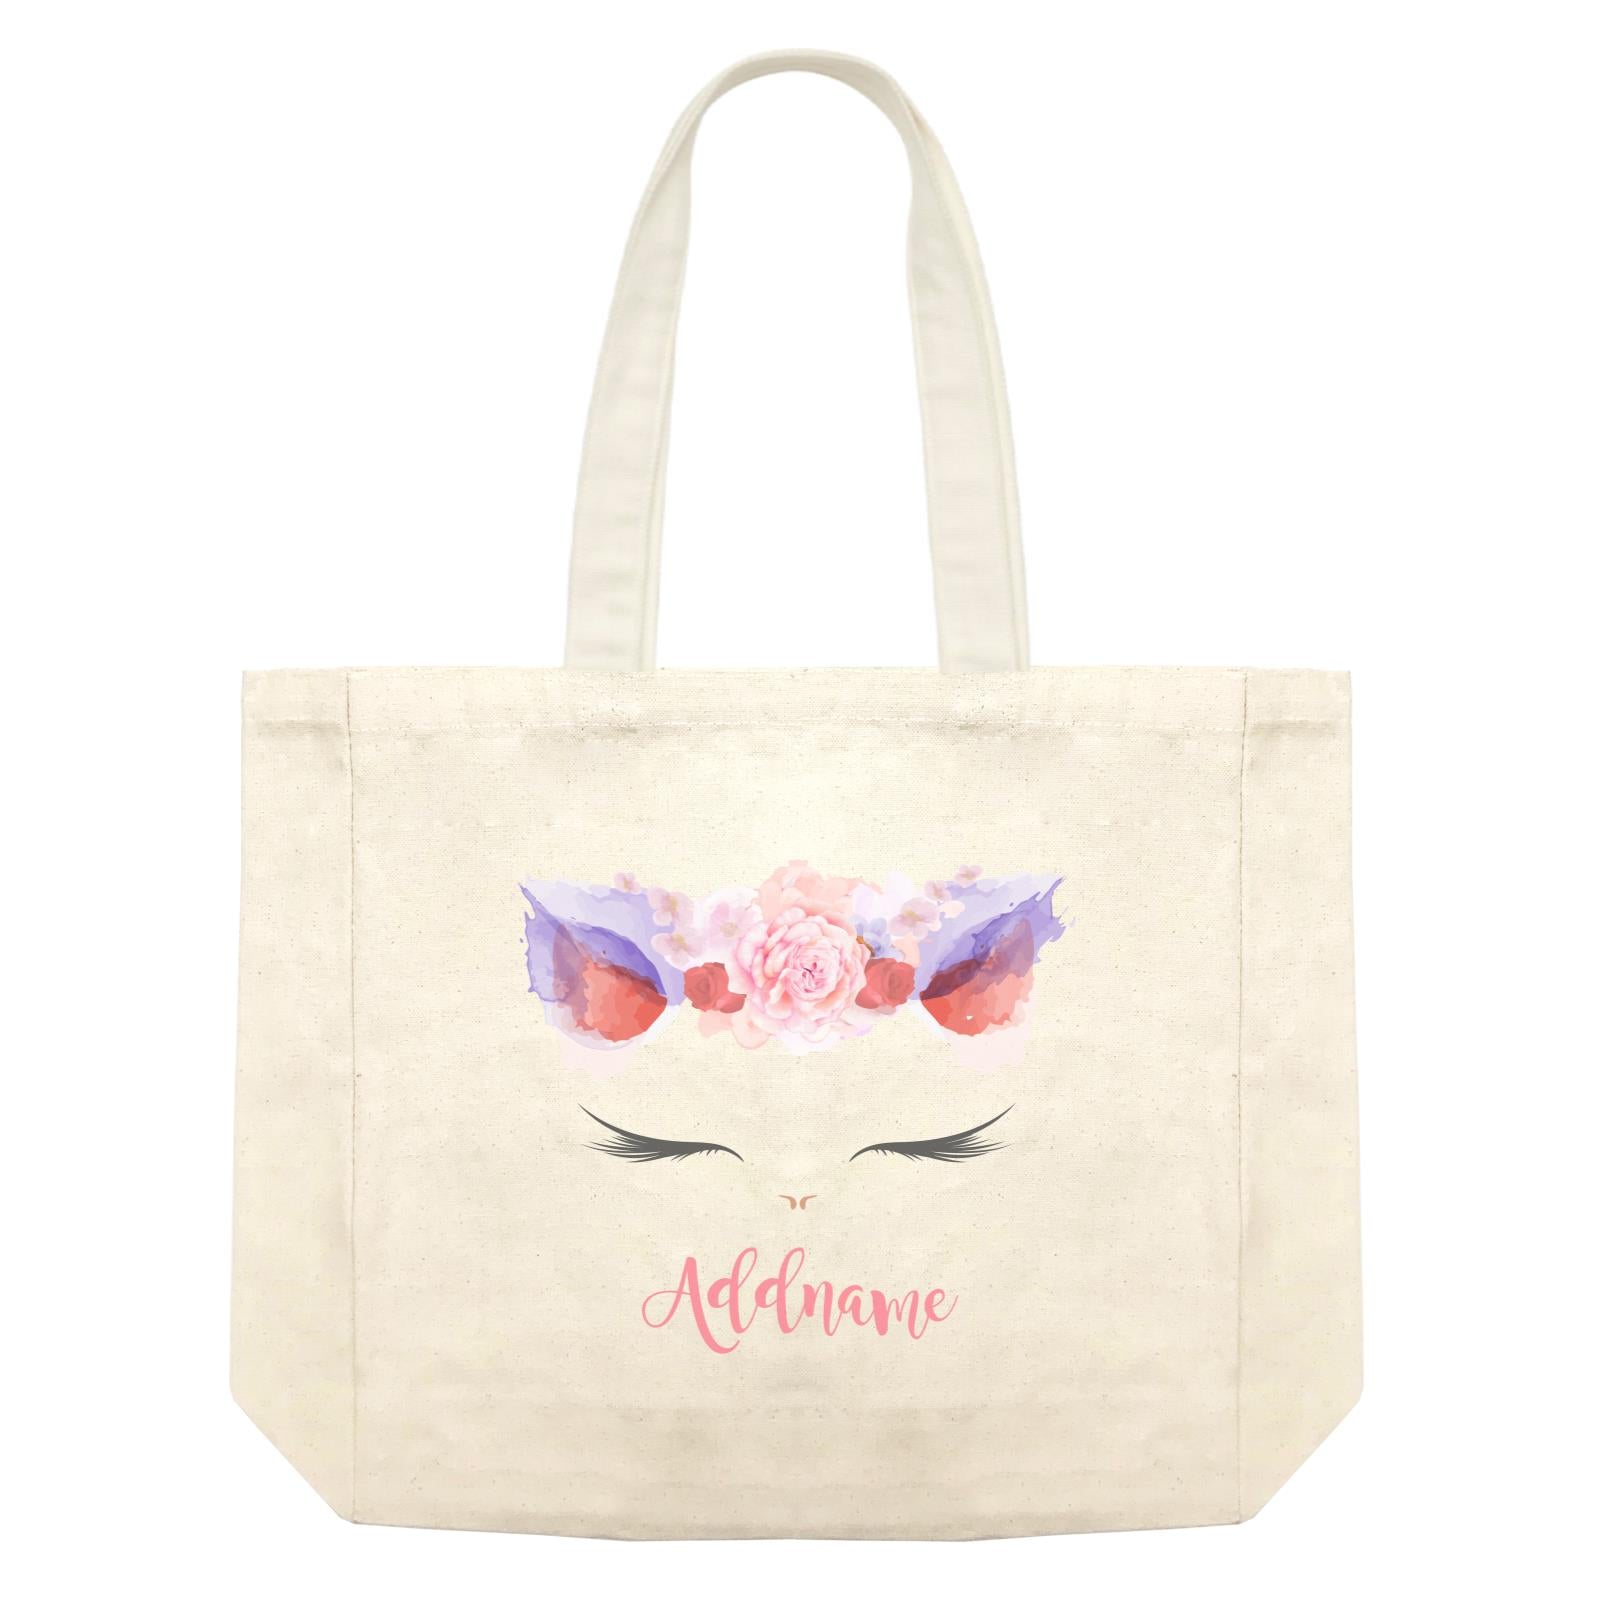 Pink and Red Roses Garland Cat Face Addname Shopping Bag